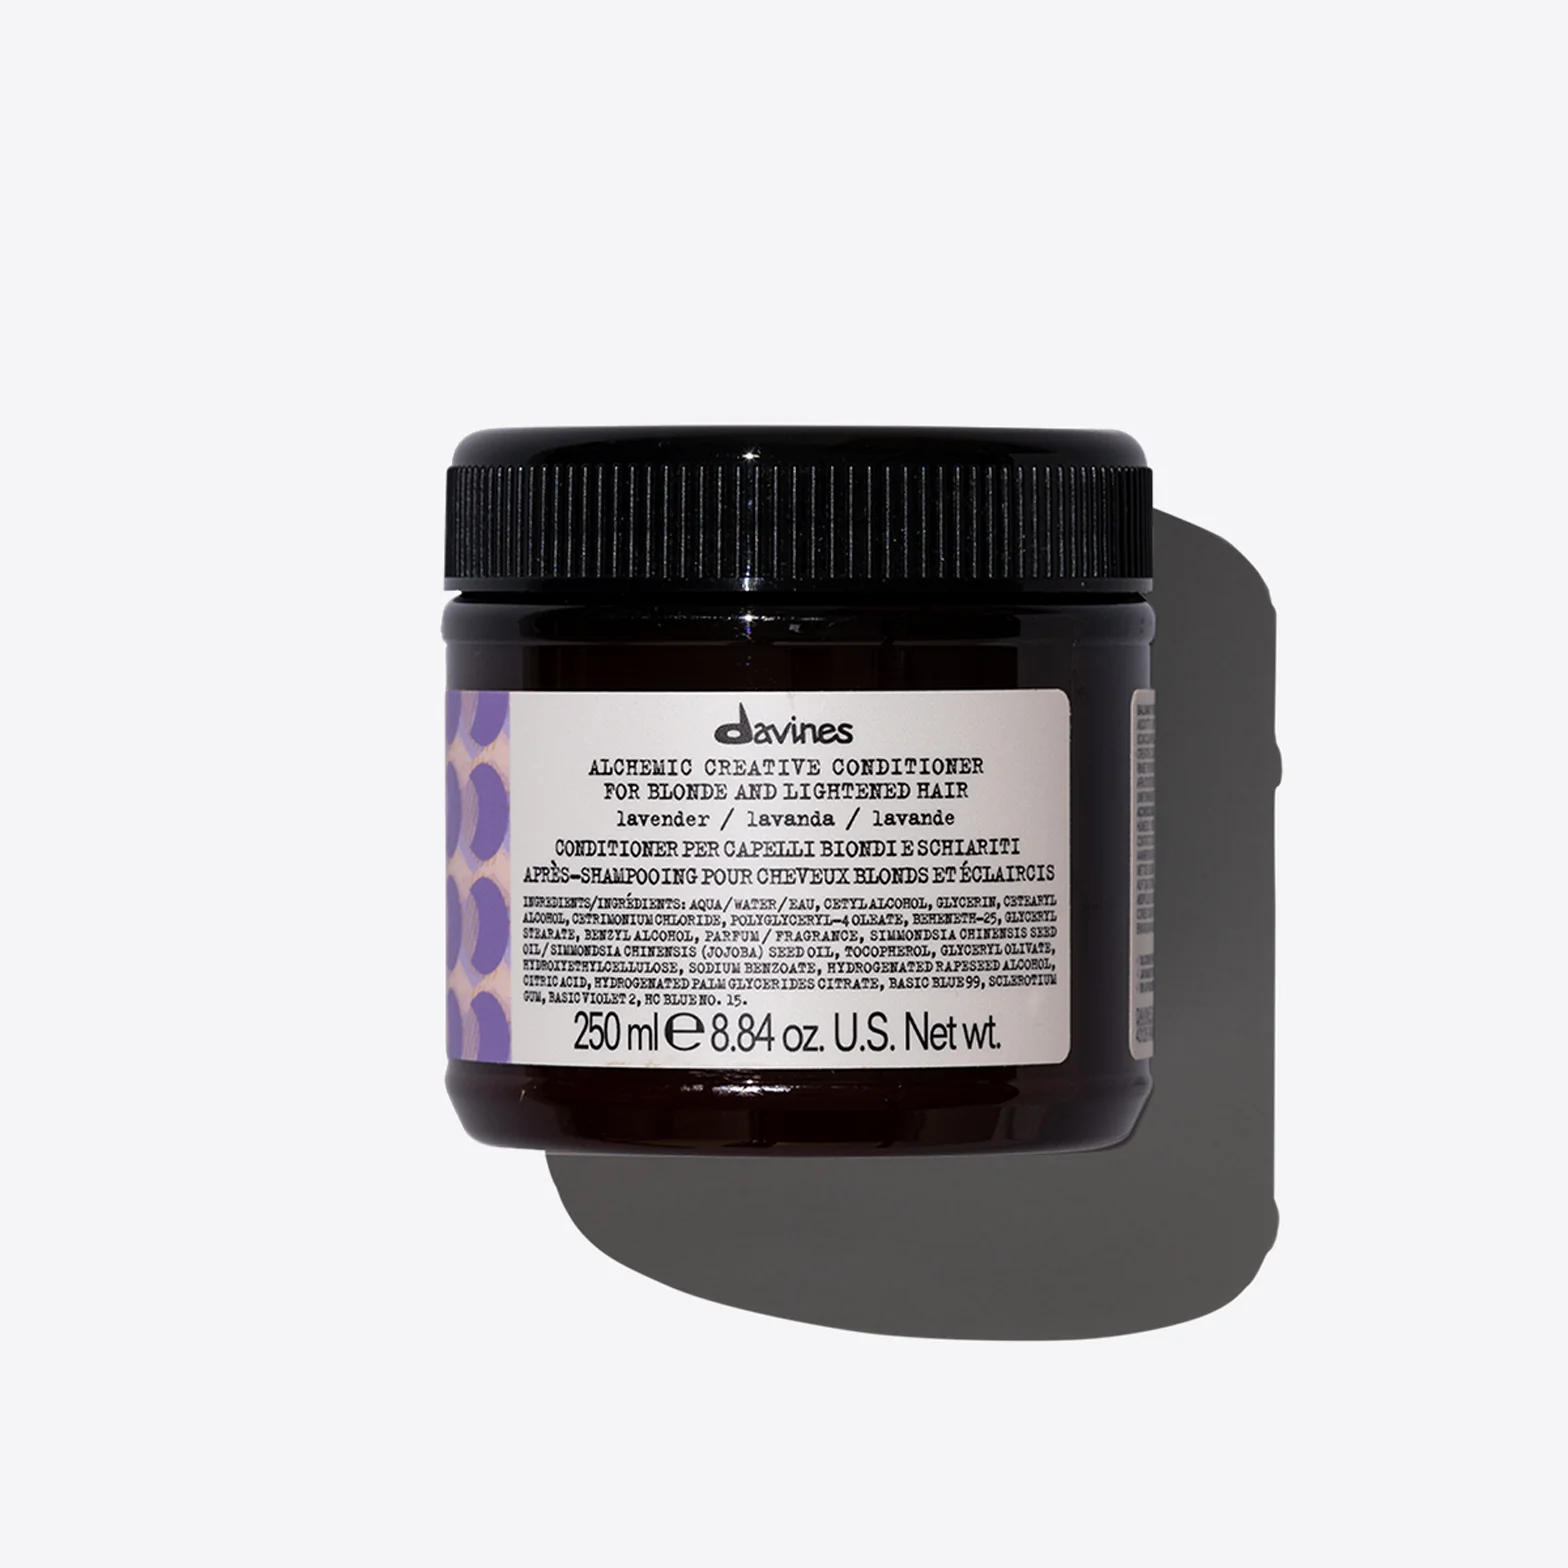 Alchemic Creative Conditioner for blonde and lightened hair 